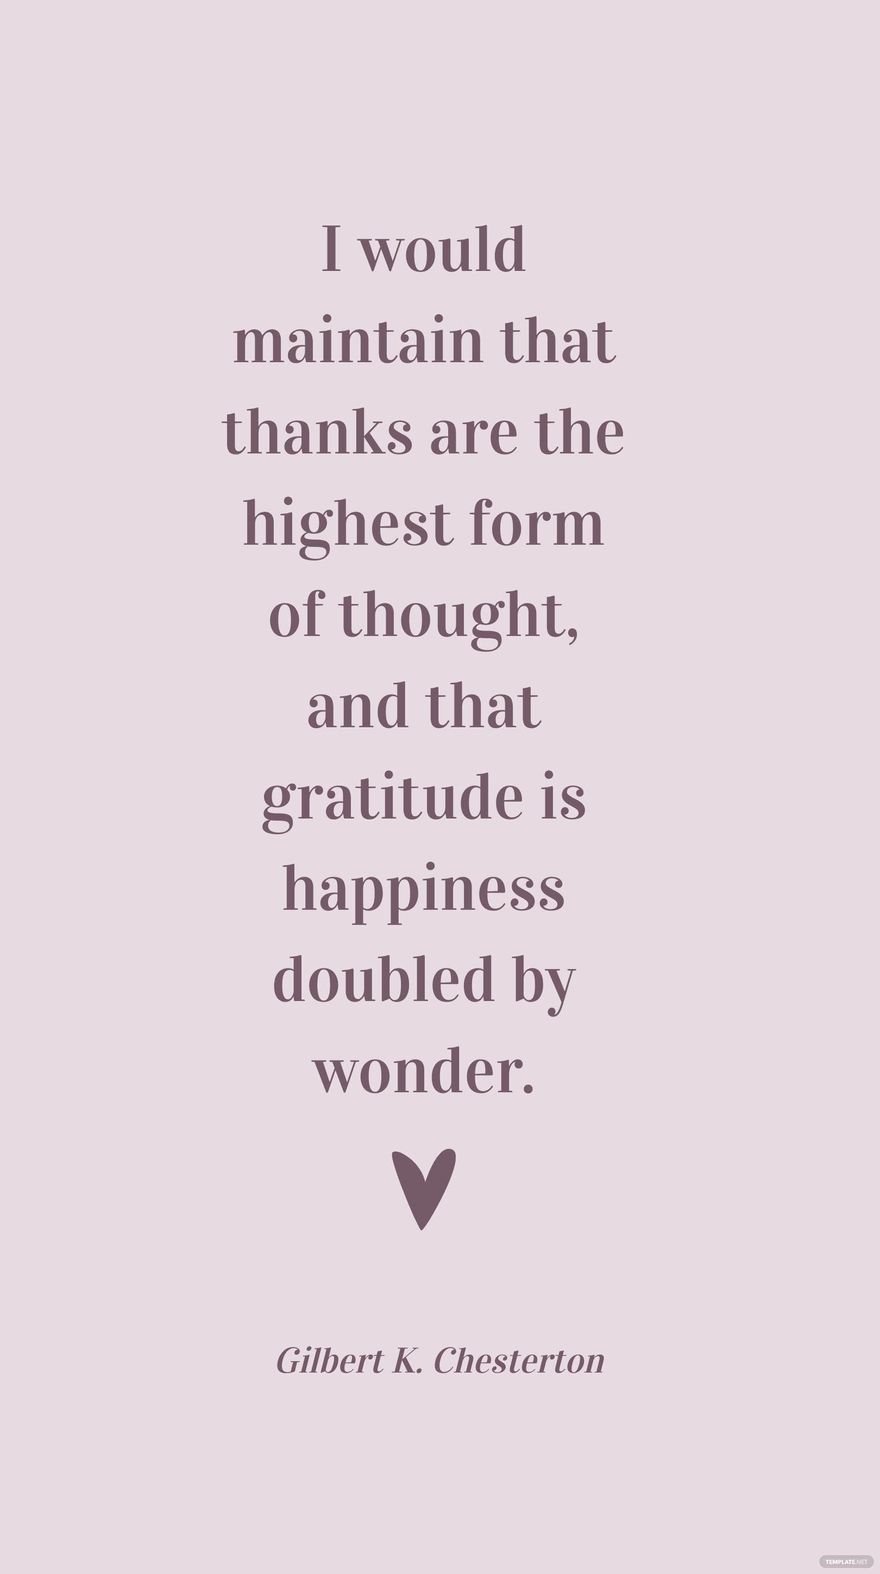 Free Gilbert K. Chesterton - I would maintain that thanks are the highest form of thought, and that gratitude is happiness doubled by wonder. in JPG